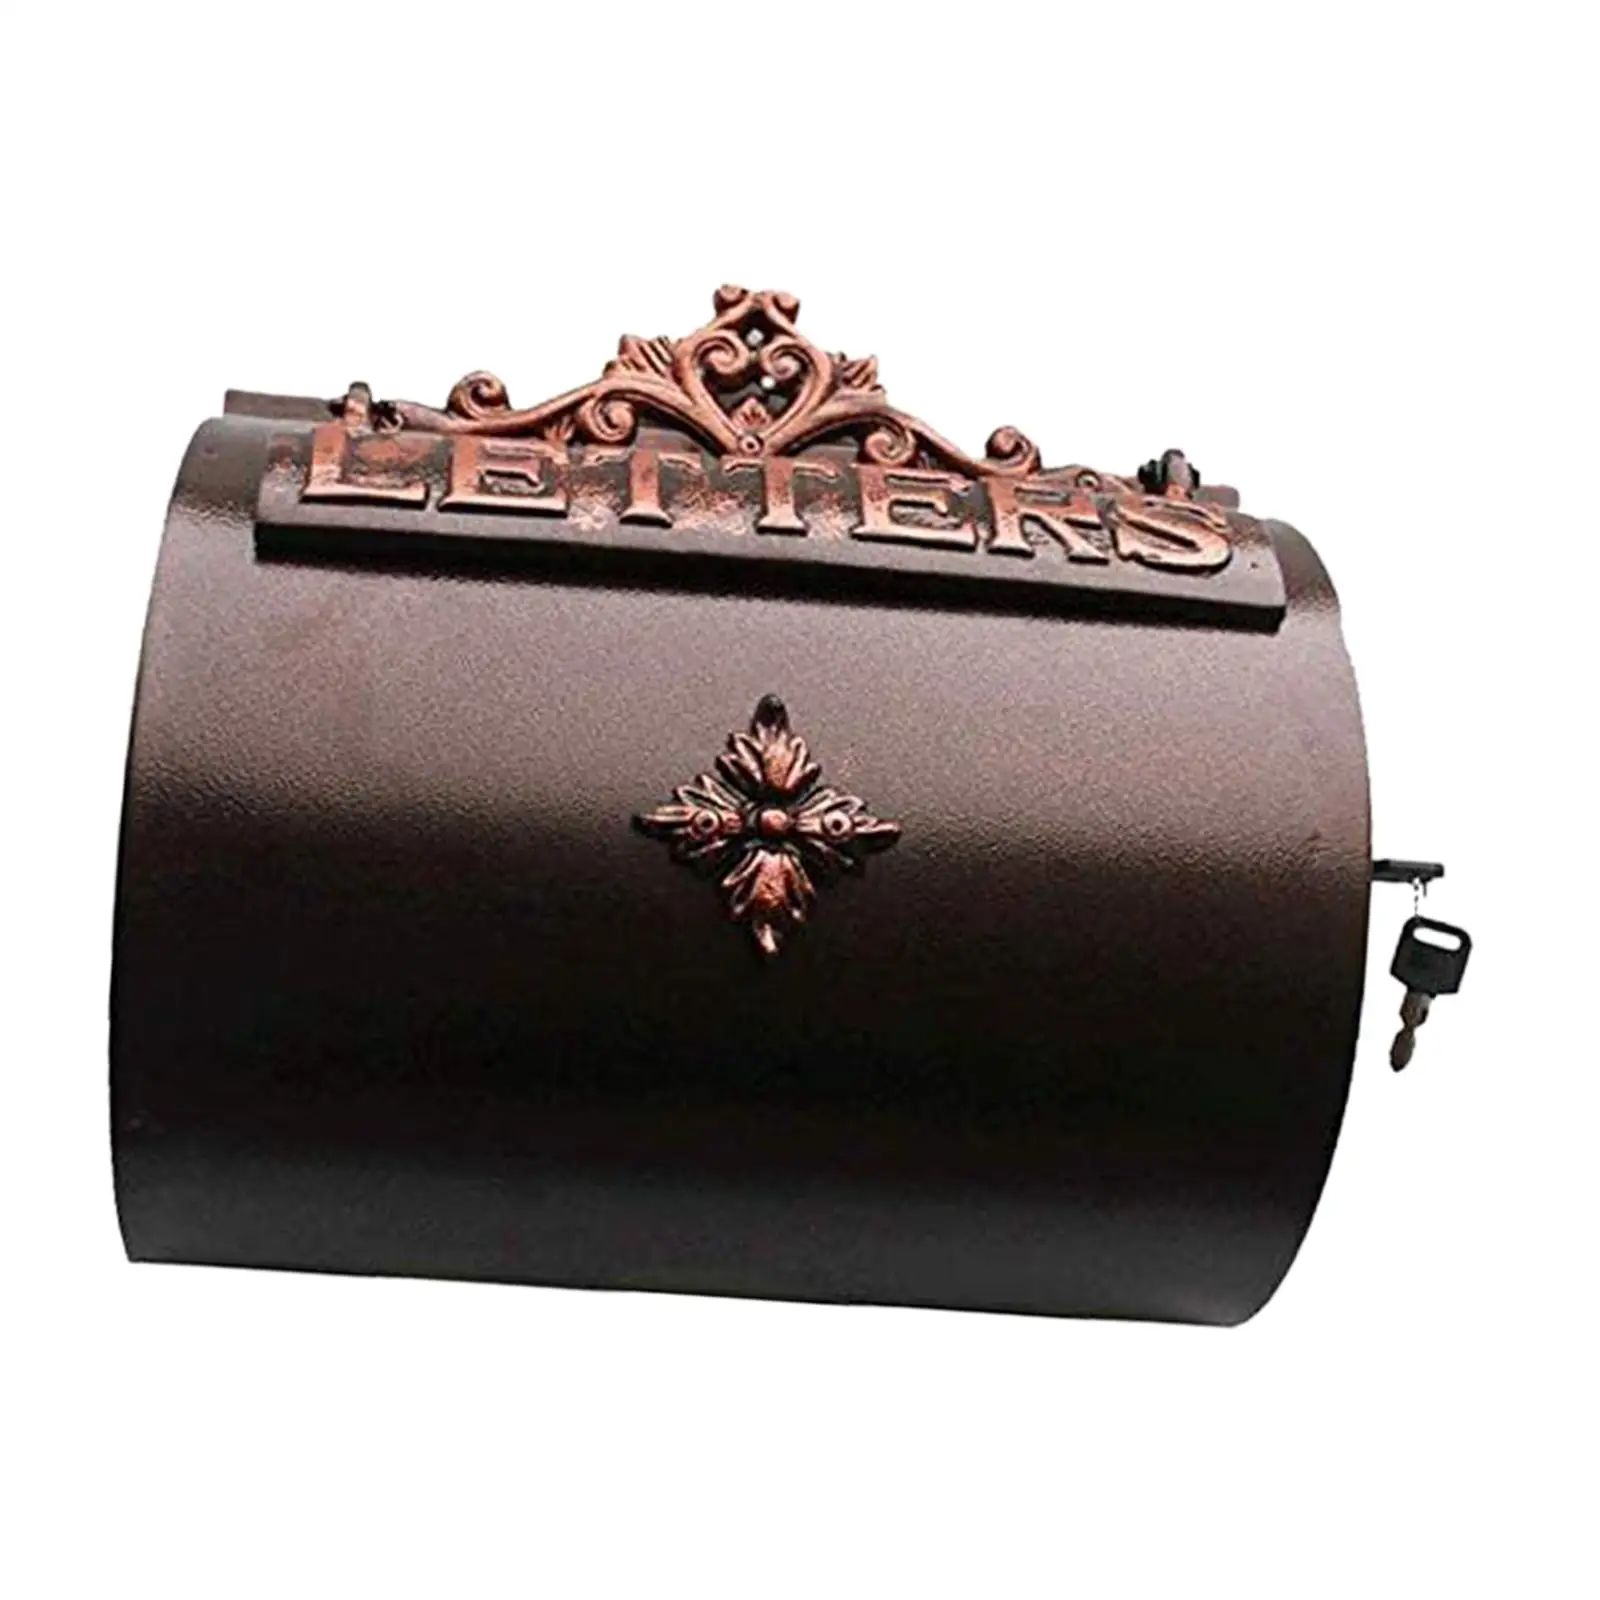 Metal Wall Mounted Mailbox Home Postbox with Key Lock Decorative Lock Mailbox Pastoral Retro Letter Box